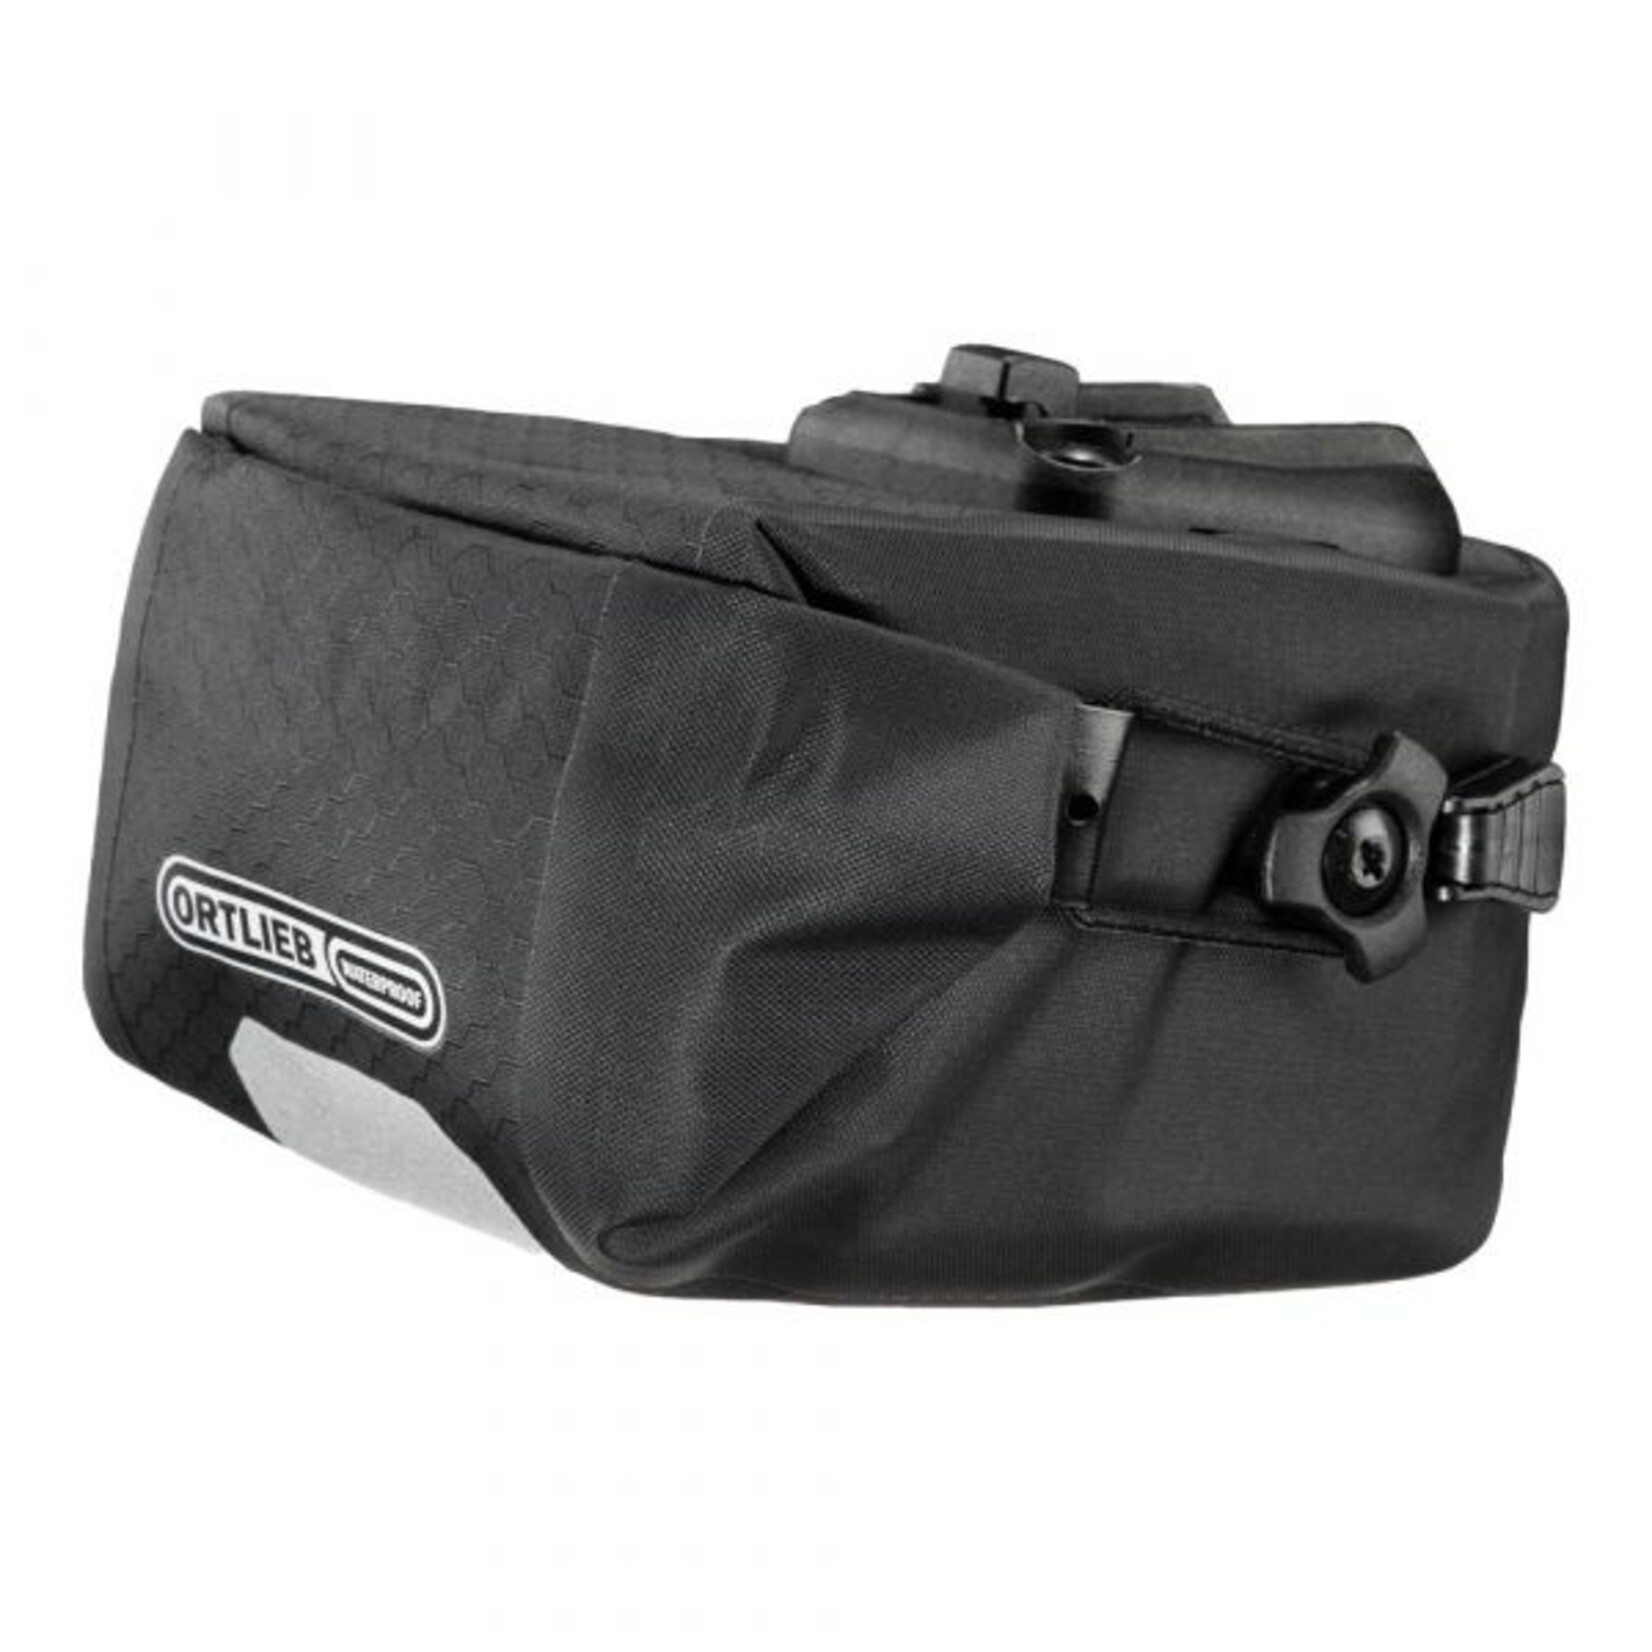 Ortlieb Micro Two Saddle Bag Matt Black 0.5L - Recycled Cycles